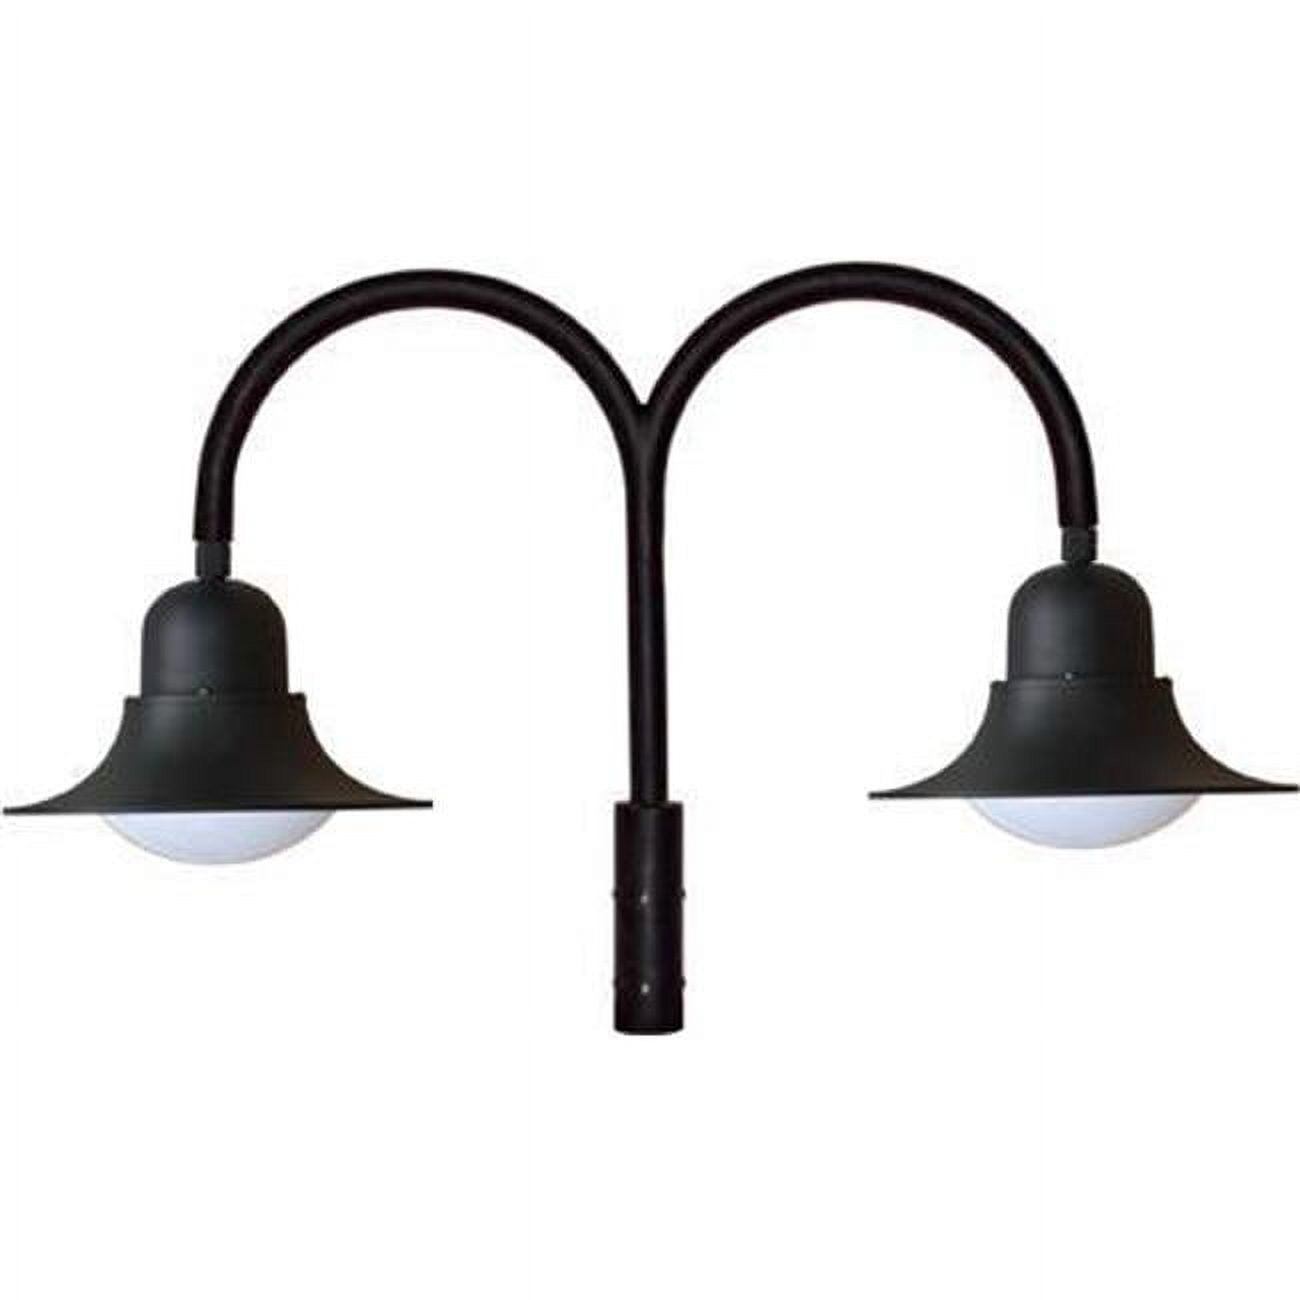 Picture of Dabmar Lighting GM622-B 35W 120V Powder Coated Cast Aluminum Post Top Light Fixture with 2x High Pressure Sodium Lamp, Black